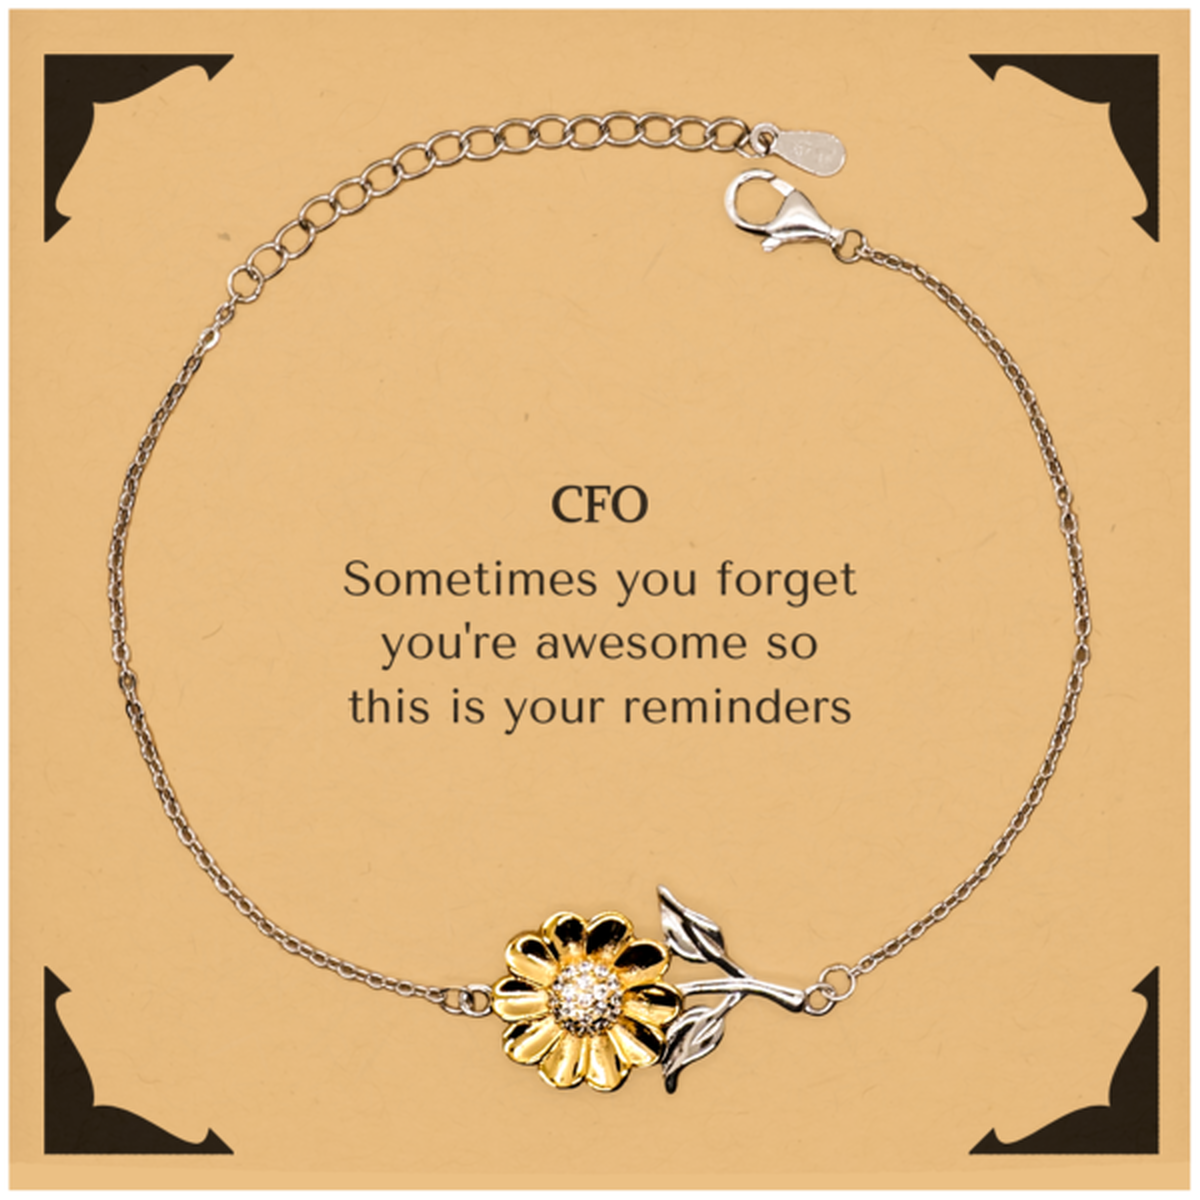 Sentimental CFO Sunflower Bracelet, CFO Sometimes you forget you're awesome so this is your reminders, Graduation Christmas Birthday Gifts for CFO, Men, Women, Coworkers